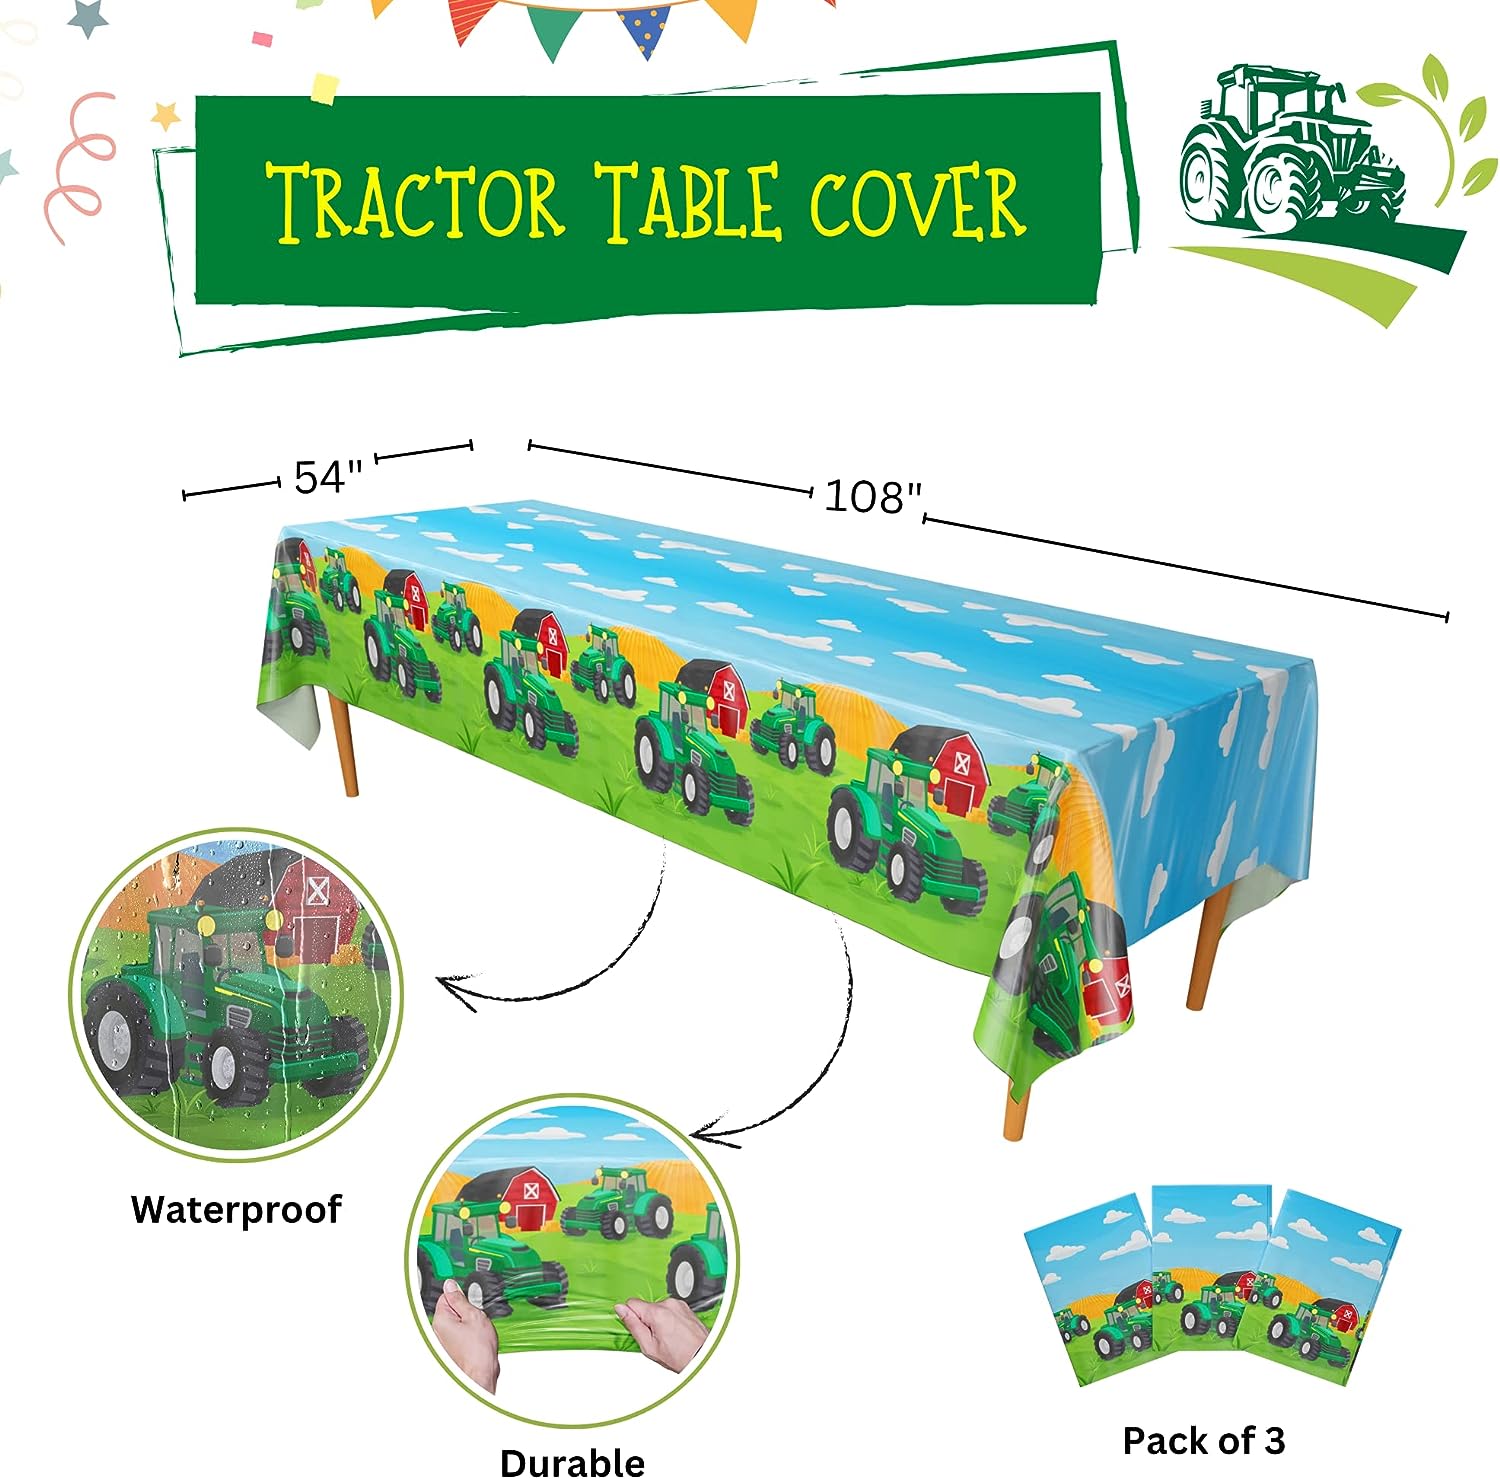 Tractor Print Plastic Table Covers - Waterproof, Durable, Pack of 3